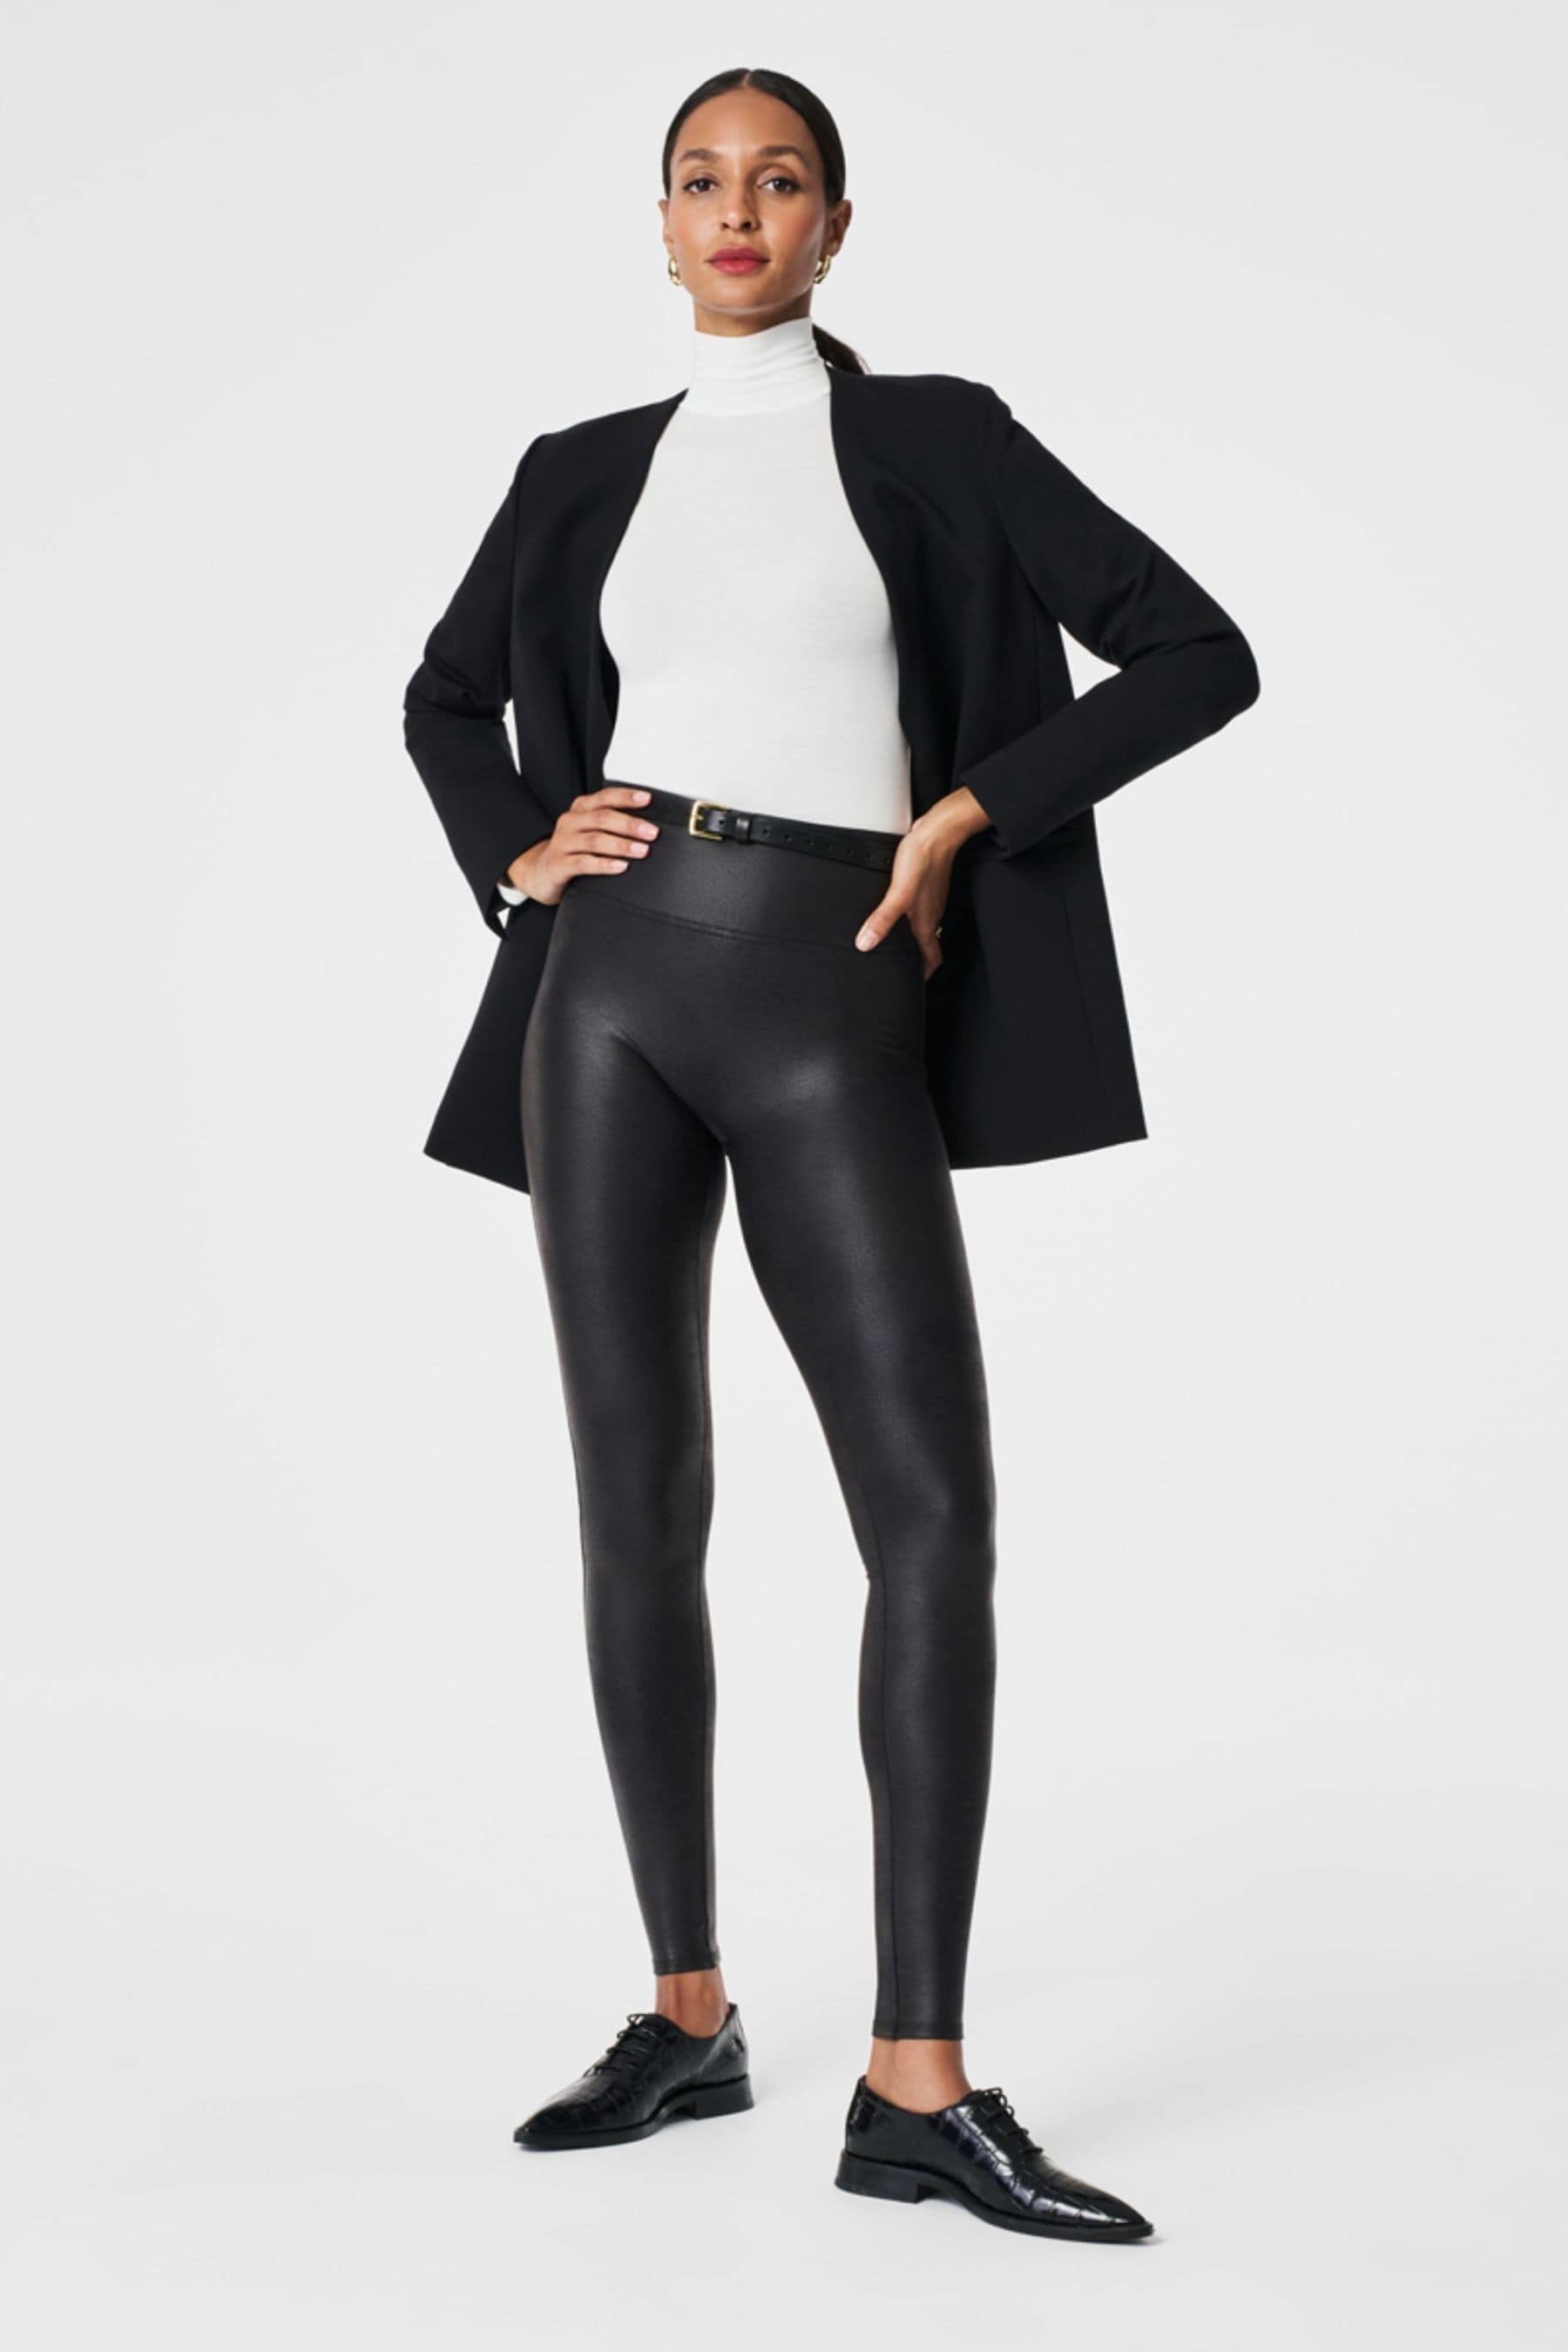 Sculpt and Shape with Calzedonia's Total Shaper Faux Leather Leggings